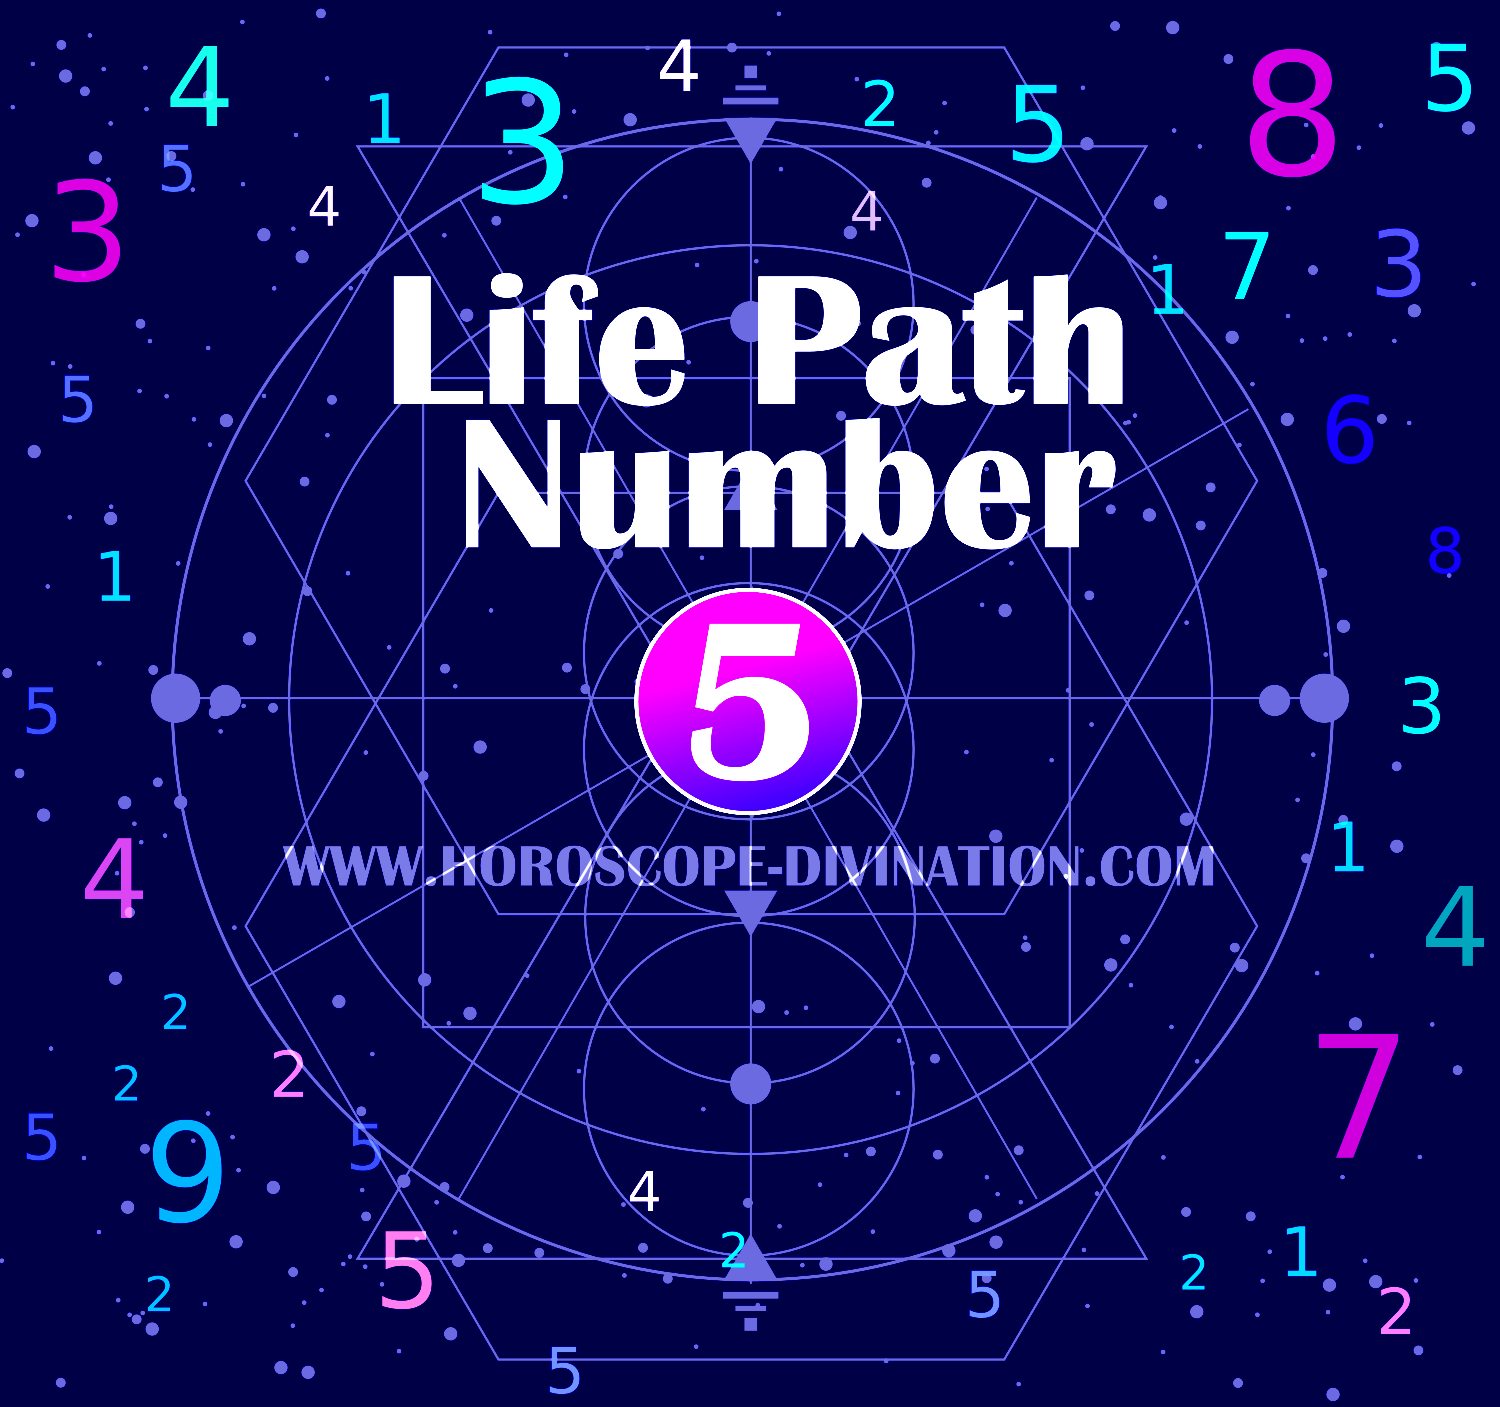 Life Path Number 5 - Numerology